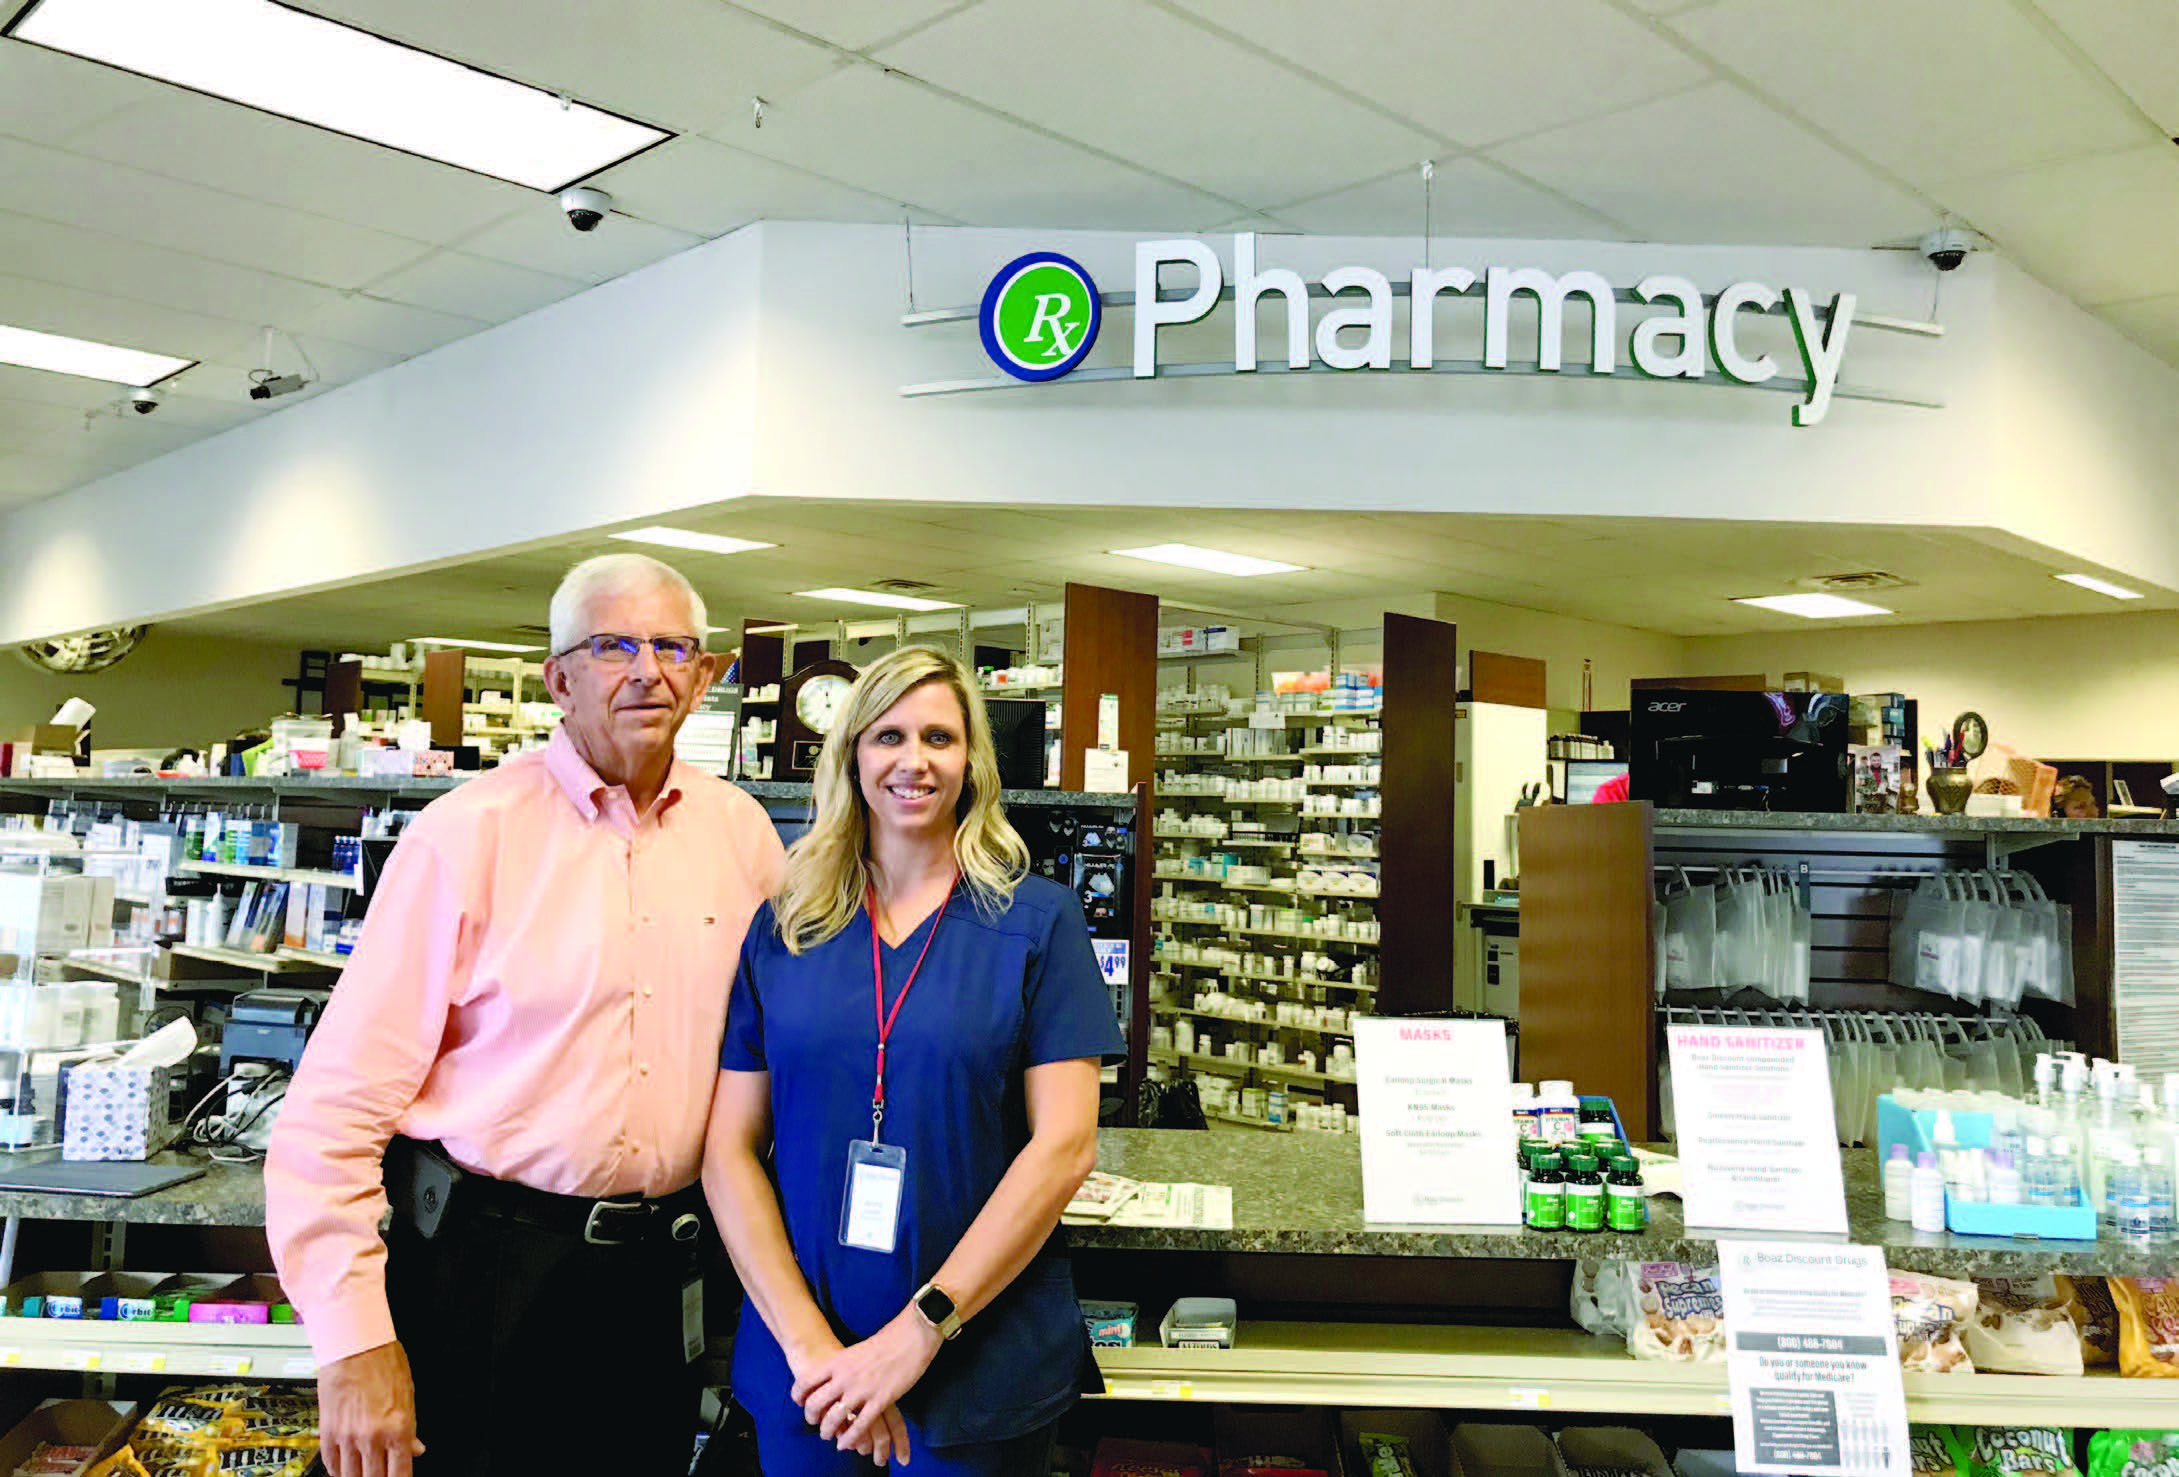 Man and woman pose in front of pharmacy counter